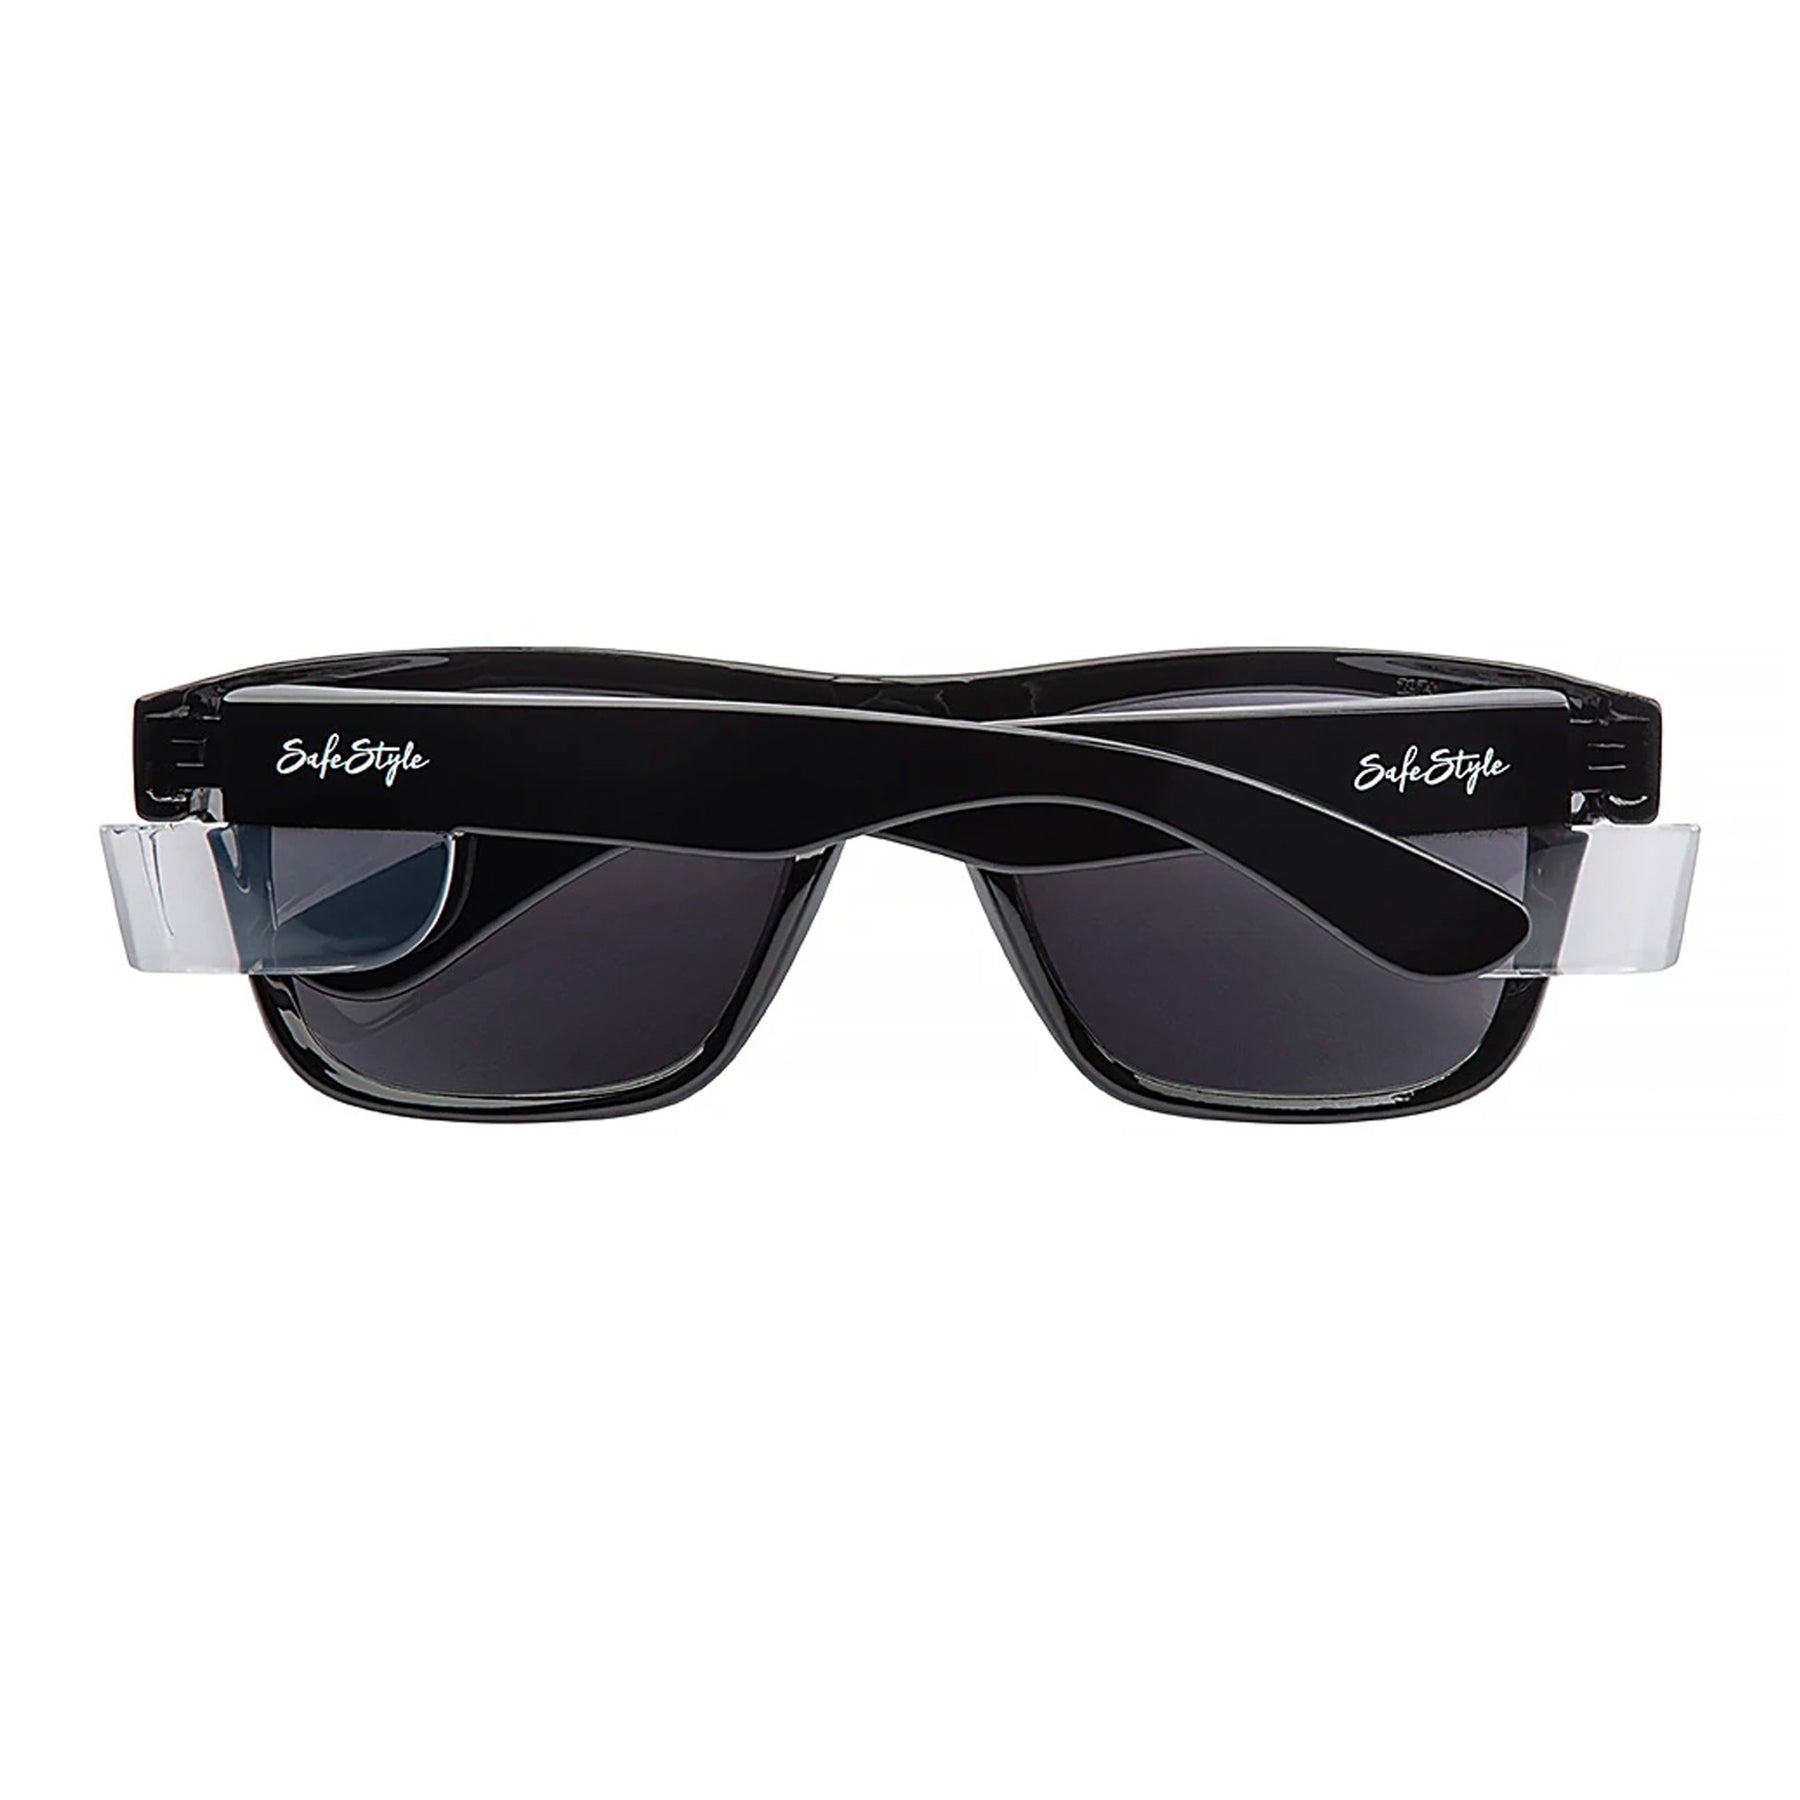 safe style fusions black frame glasses with polarised lens